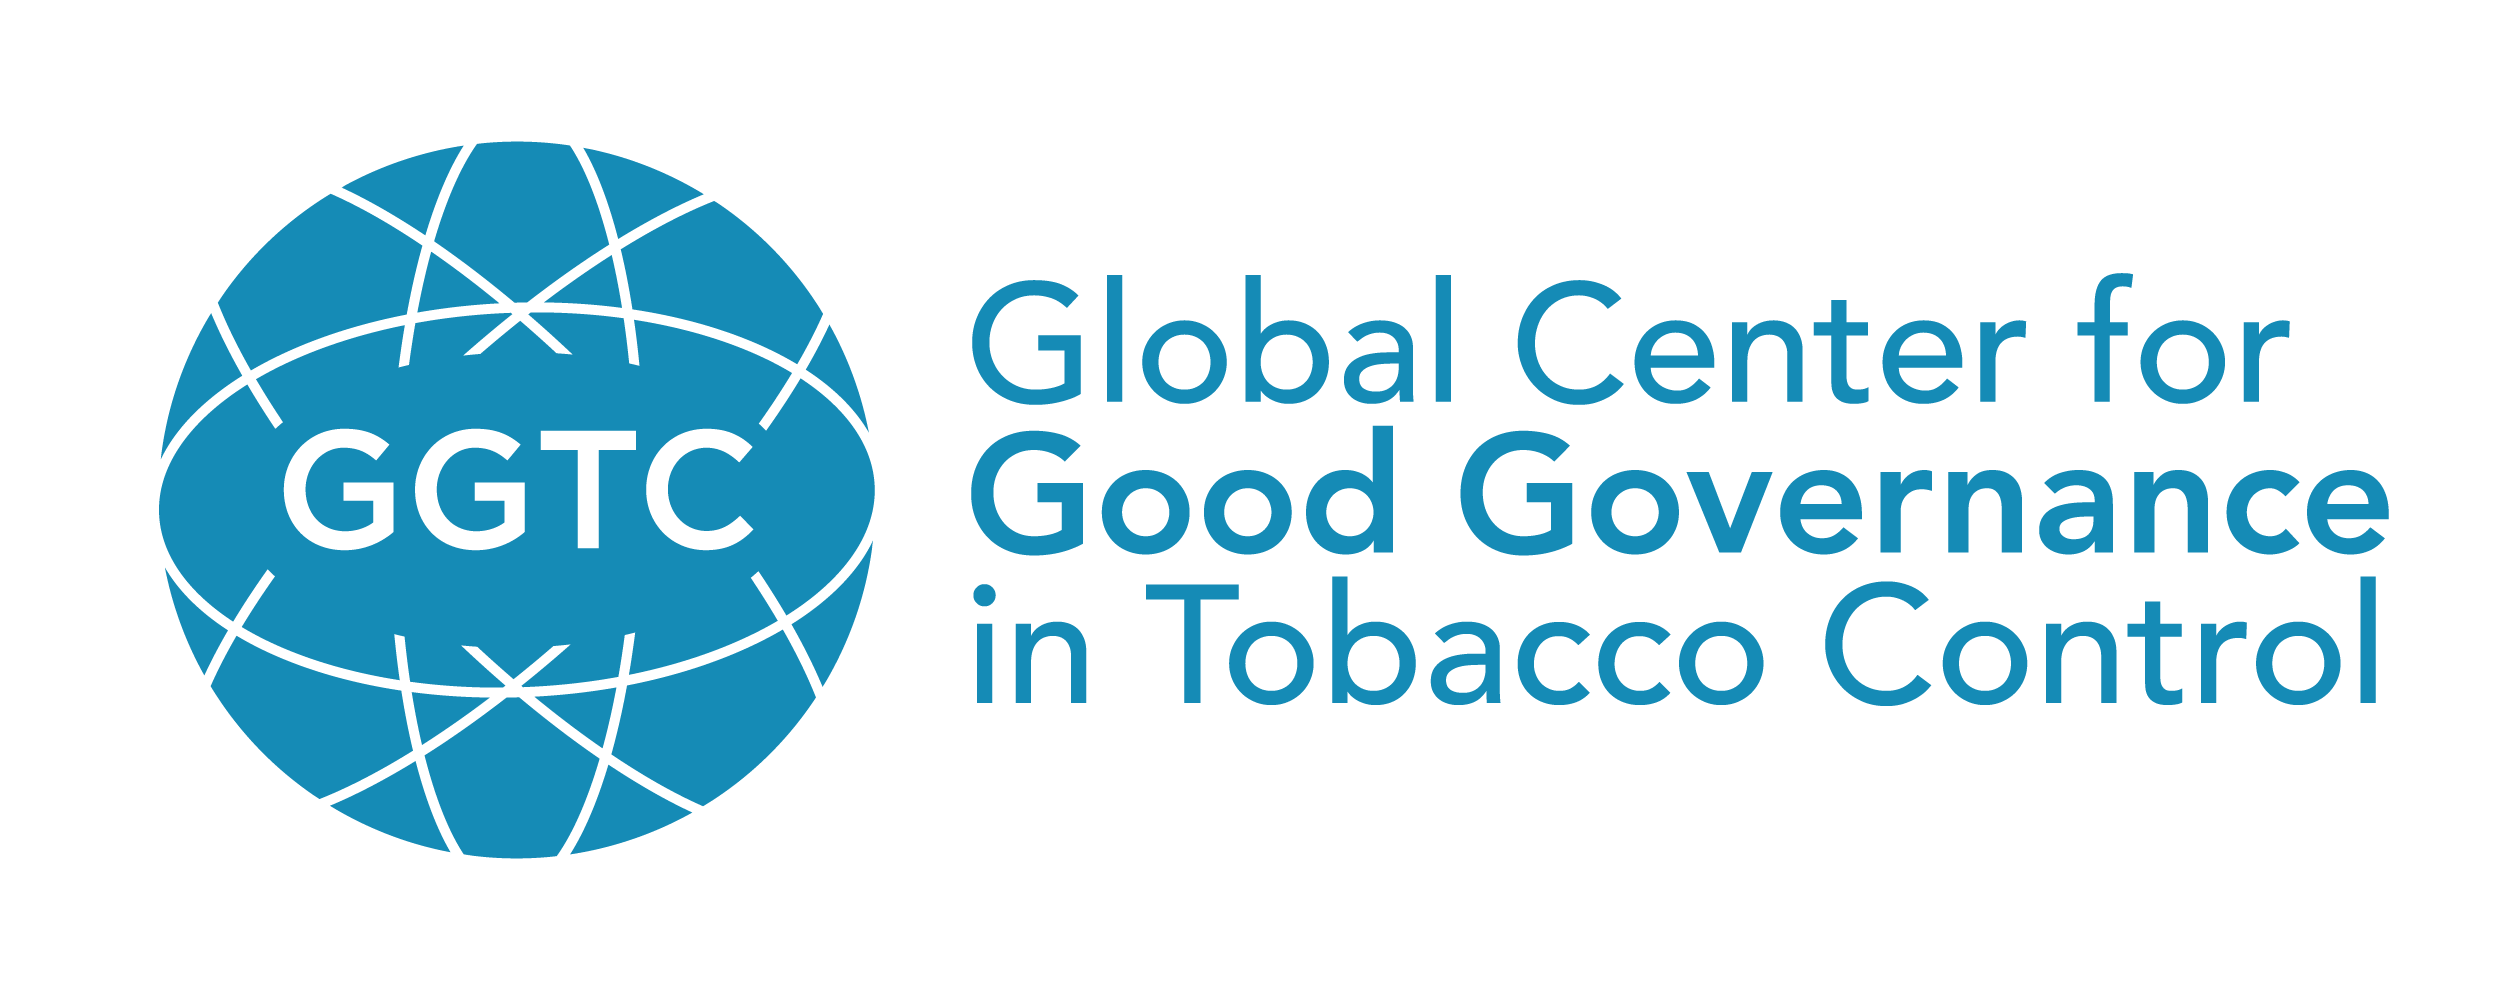 The words 'The Global Center for Good Governance in Tobacco Control' displayed around a globe